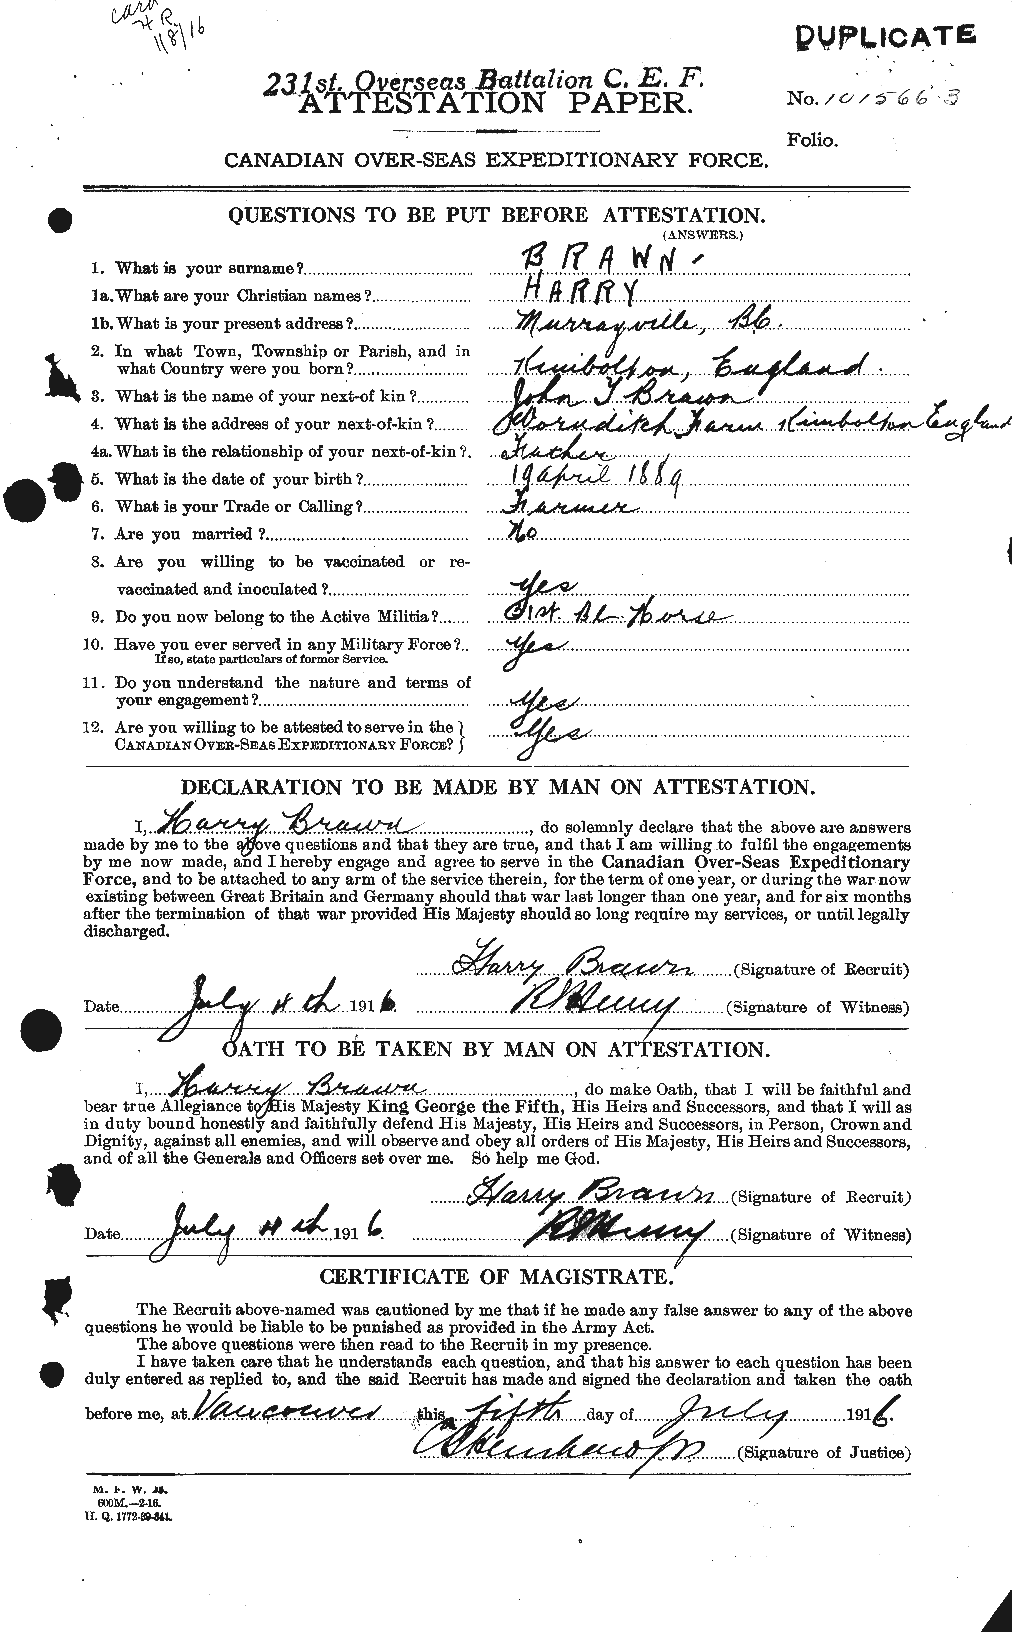 Personnel Records of the First World War - CEF 260670a